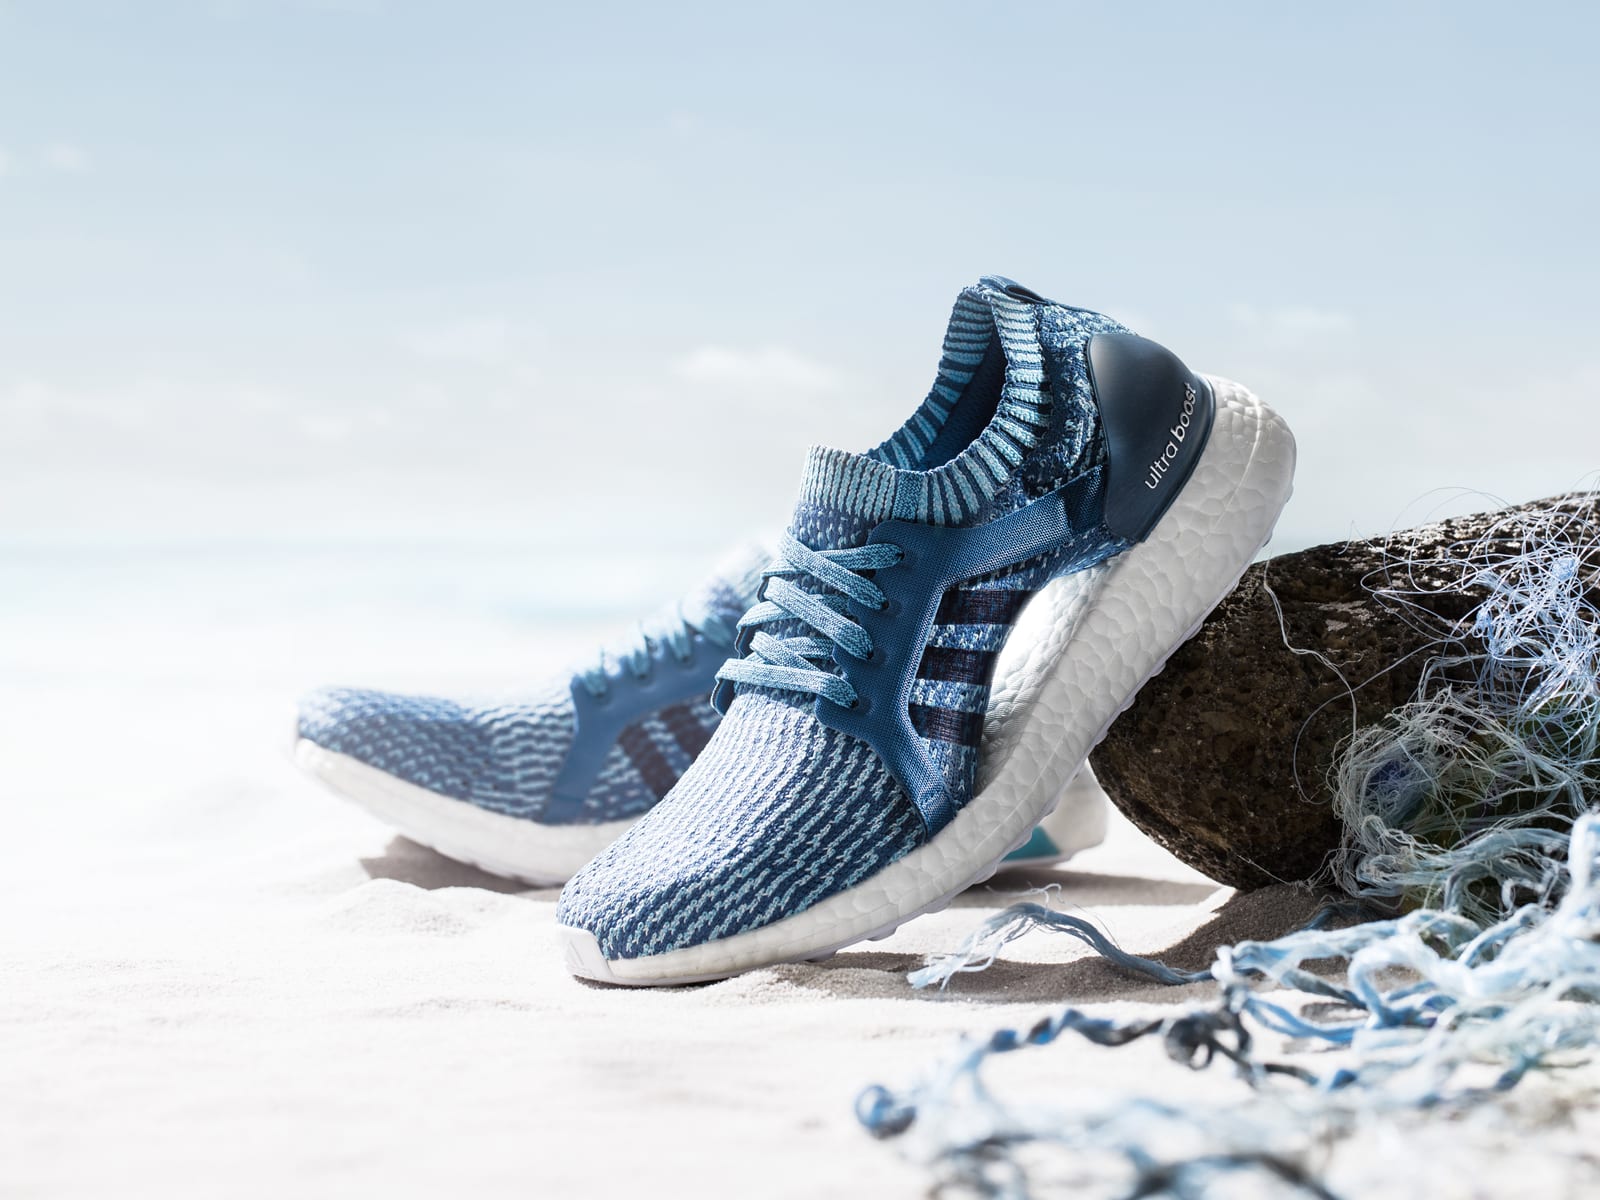 Adidas and Parley Launching new editions of Ultra Boost